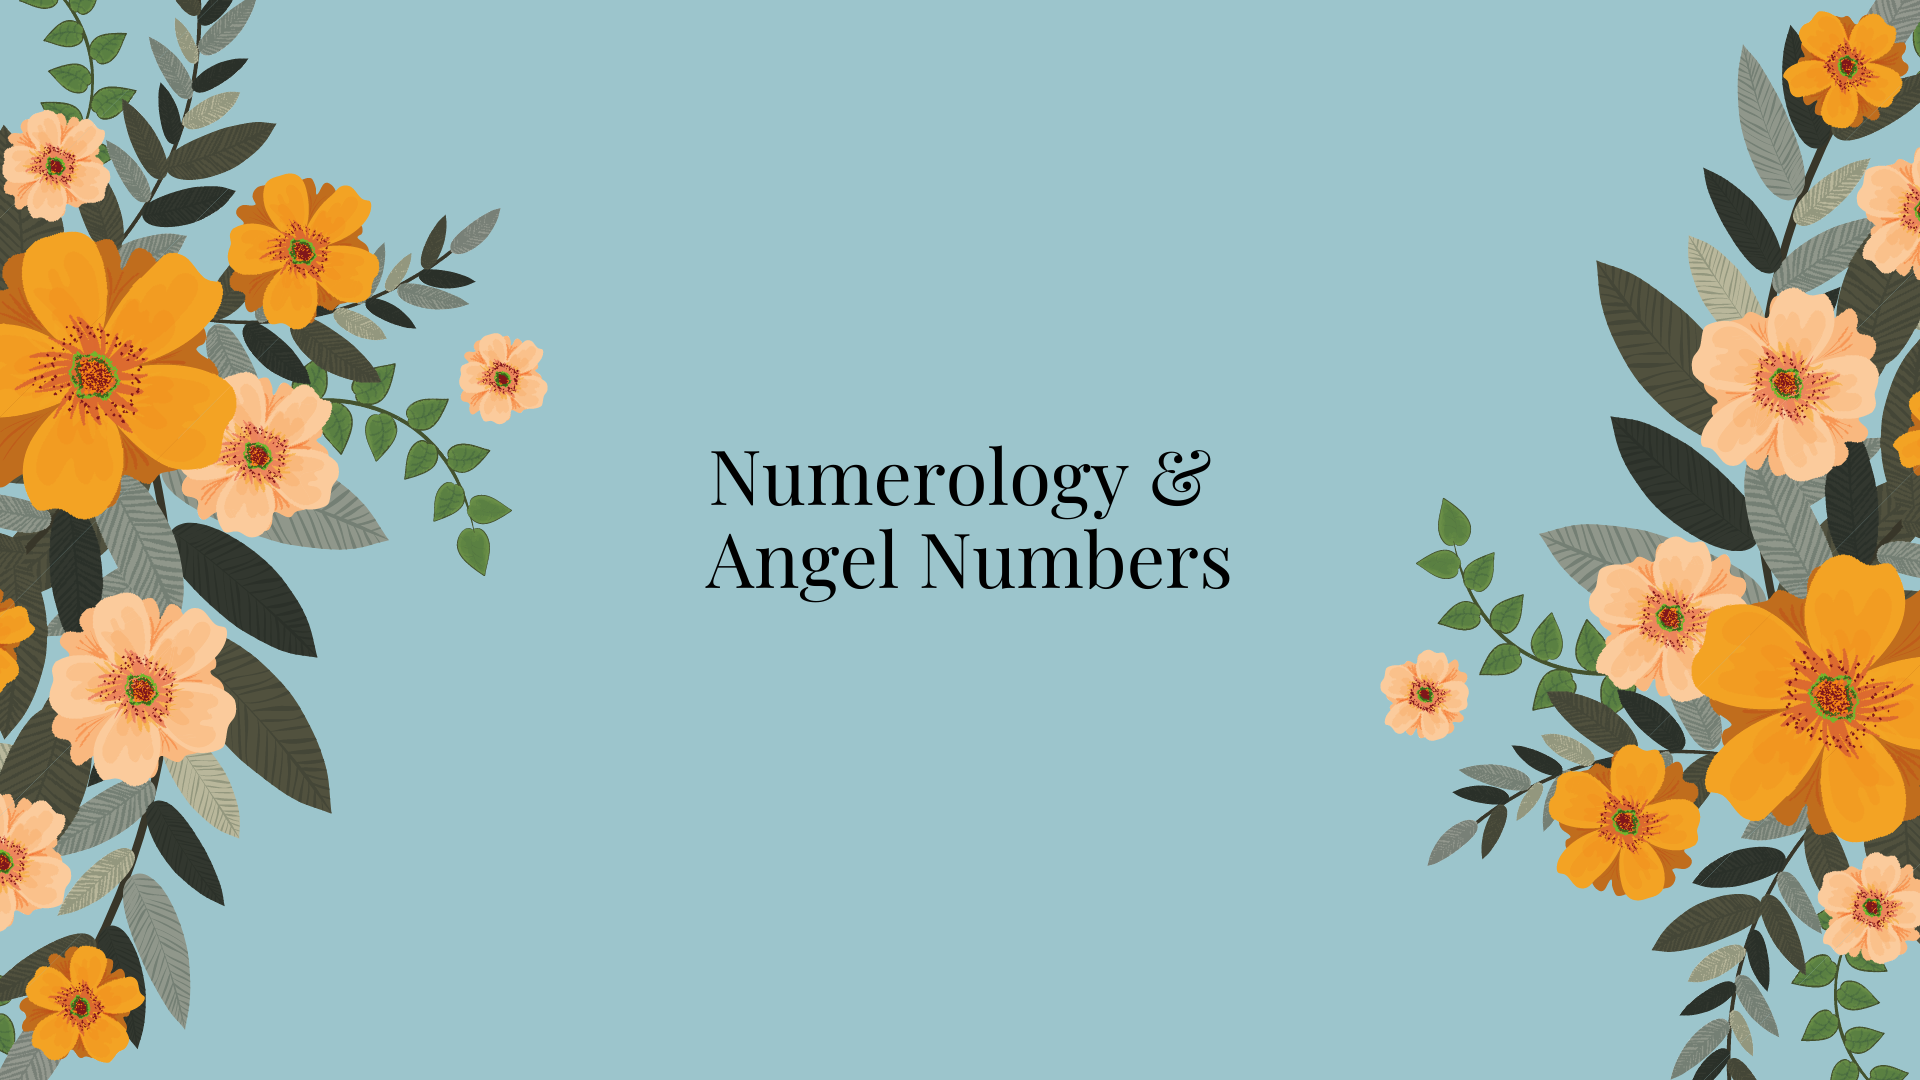 Numerology & Angel Numbers